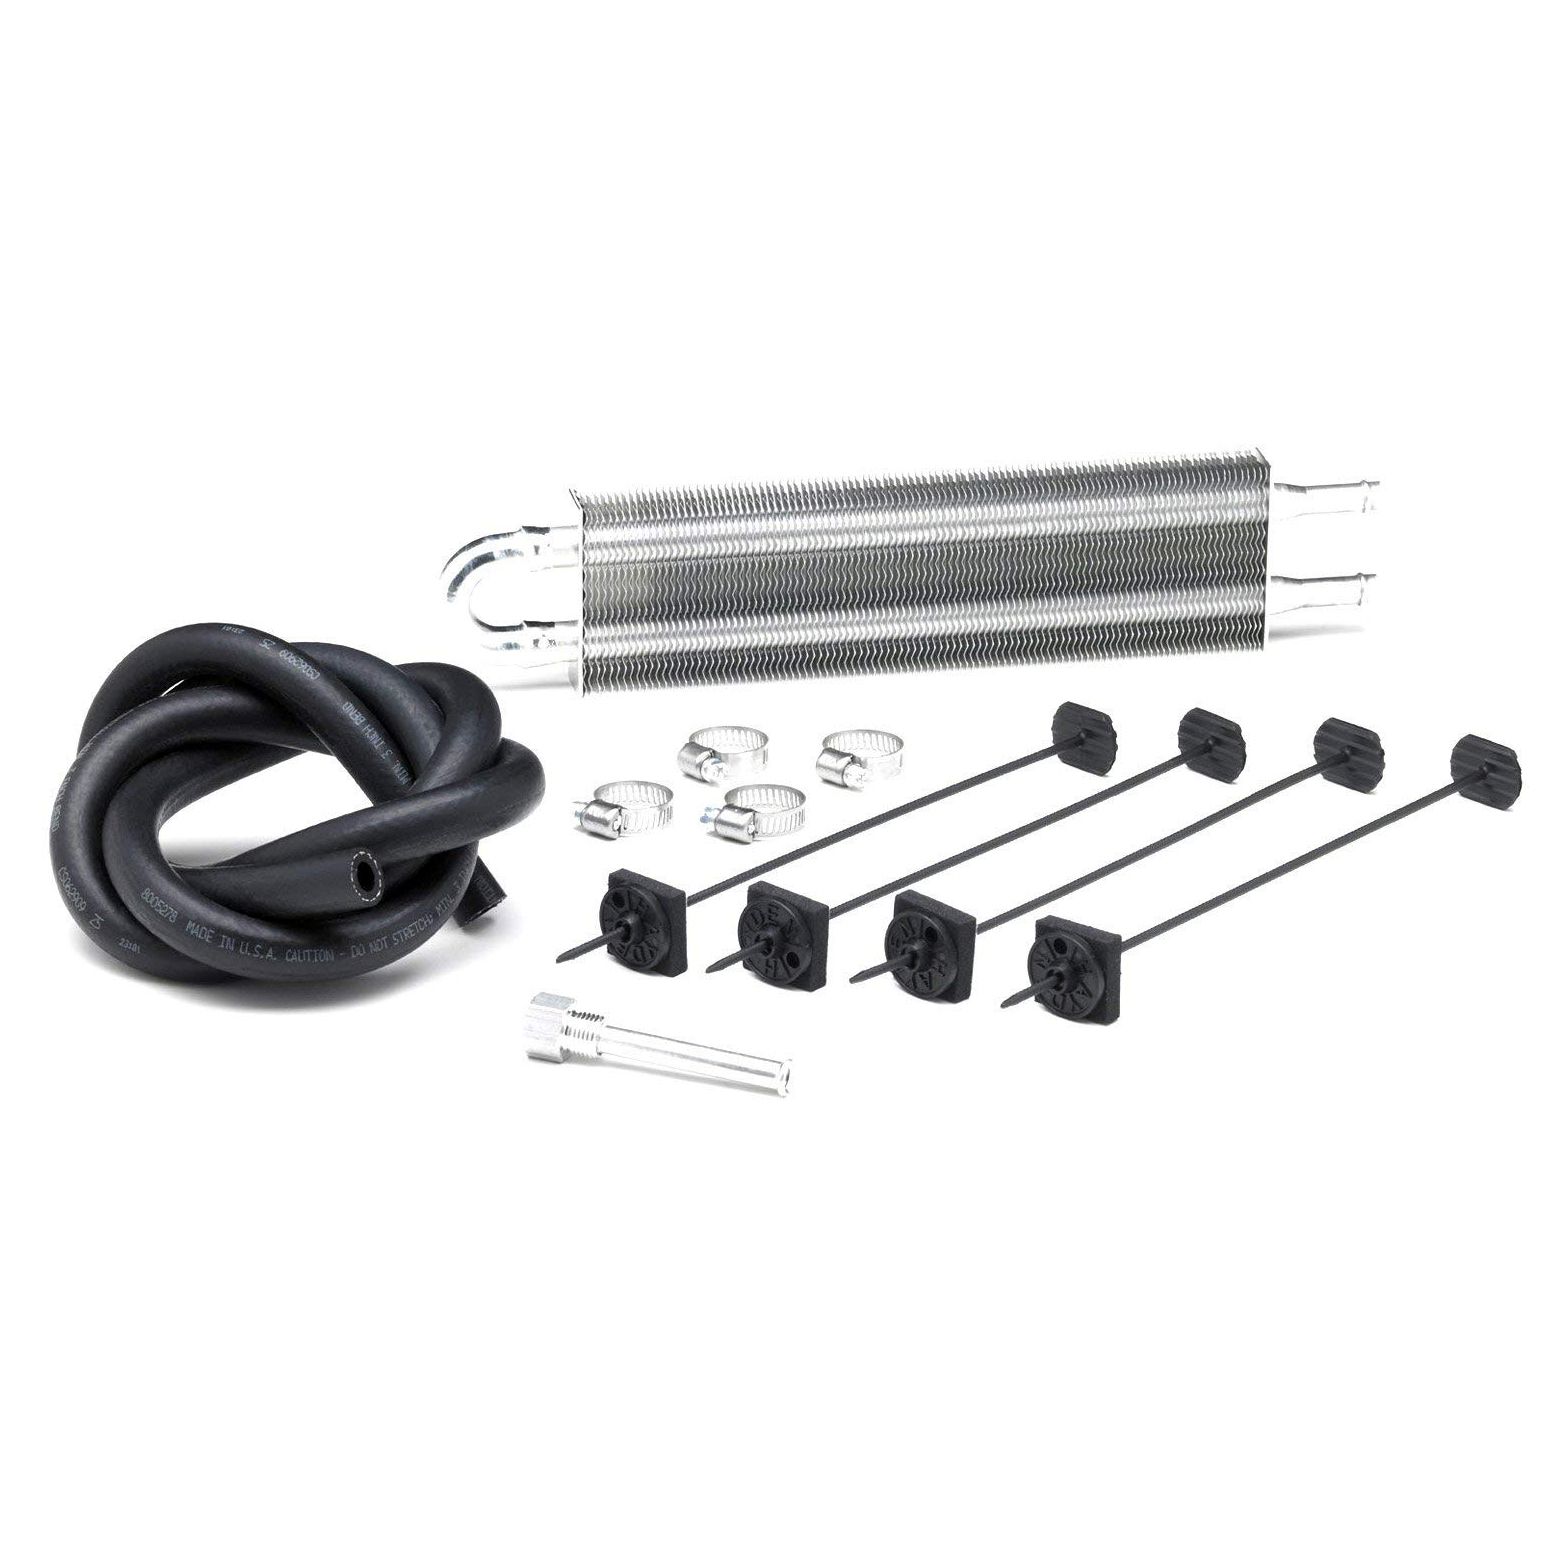 Borgeson - Power Steering Cooler Kit - P/N: 925125 -  Includes 2.5" X 9" Standard 2 pass power steering cooler, cooler mount kit, 6' of high temp power steering return hose, 3/8" hose barb and 4 hose clamps.